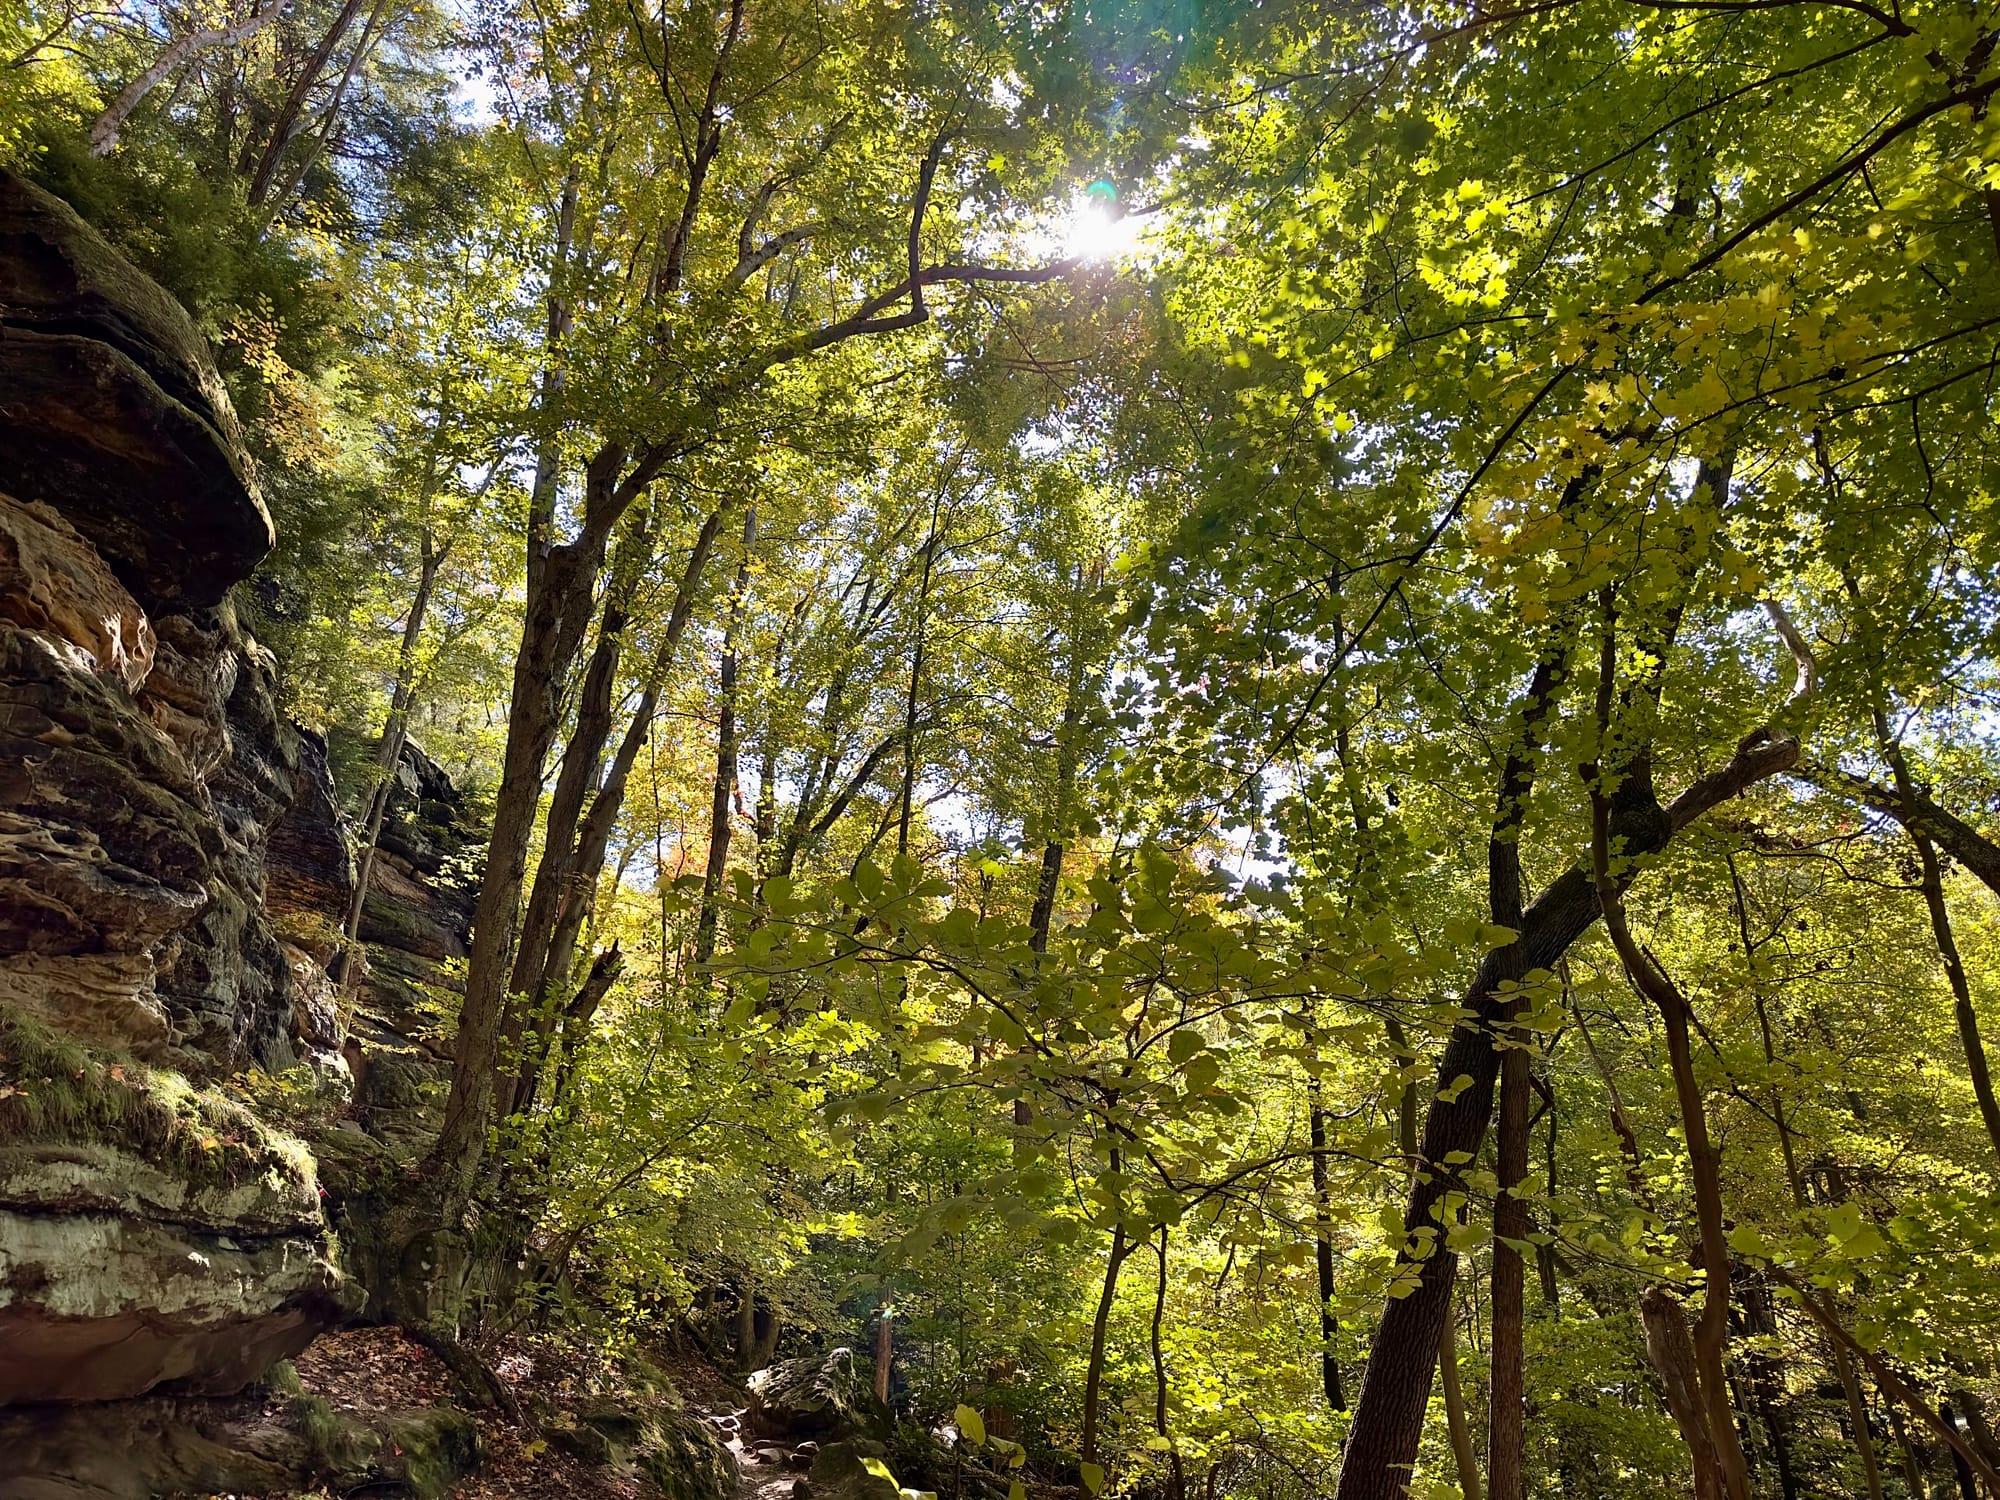 Sun peaks through the trees of the Ledges trail in Cuyahoga Valley National Park